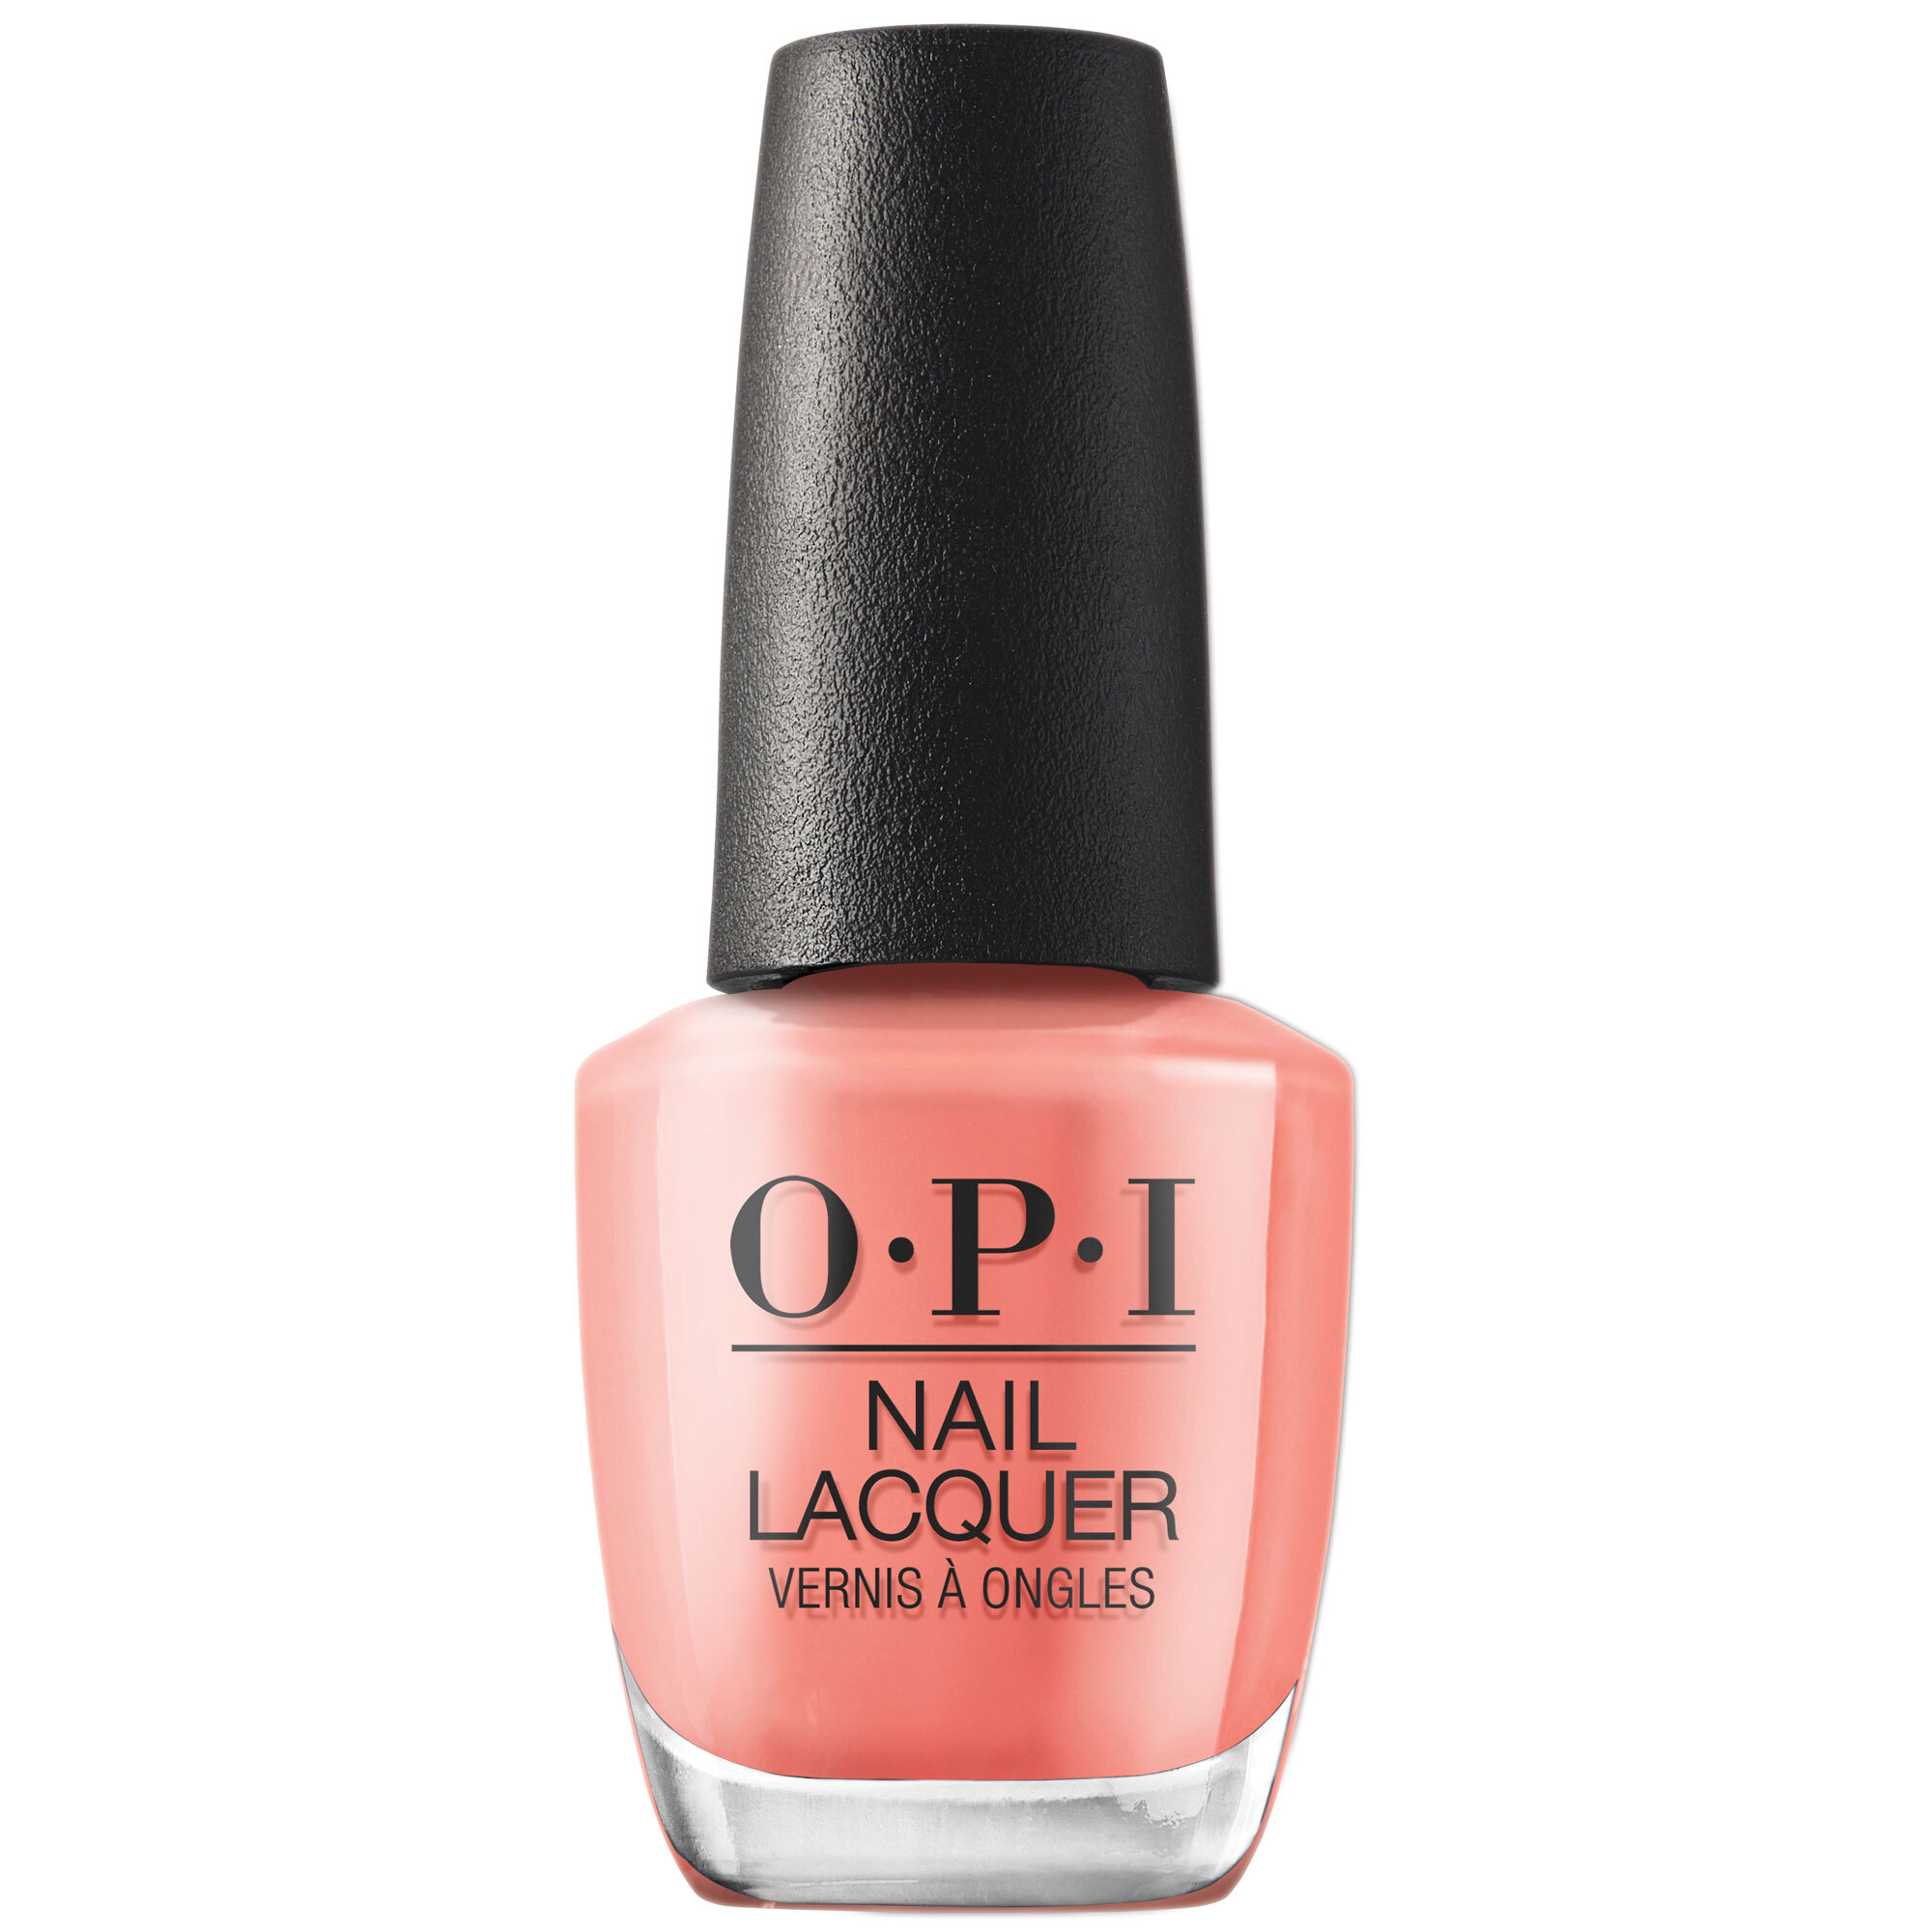 OPI Summer Make the Rules - Flex on the Beach